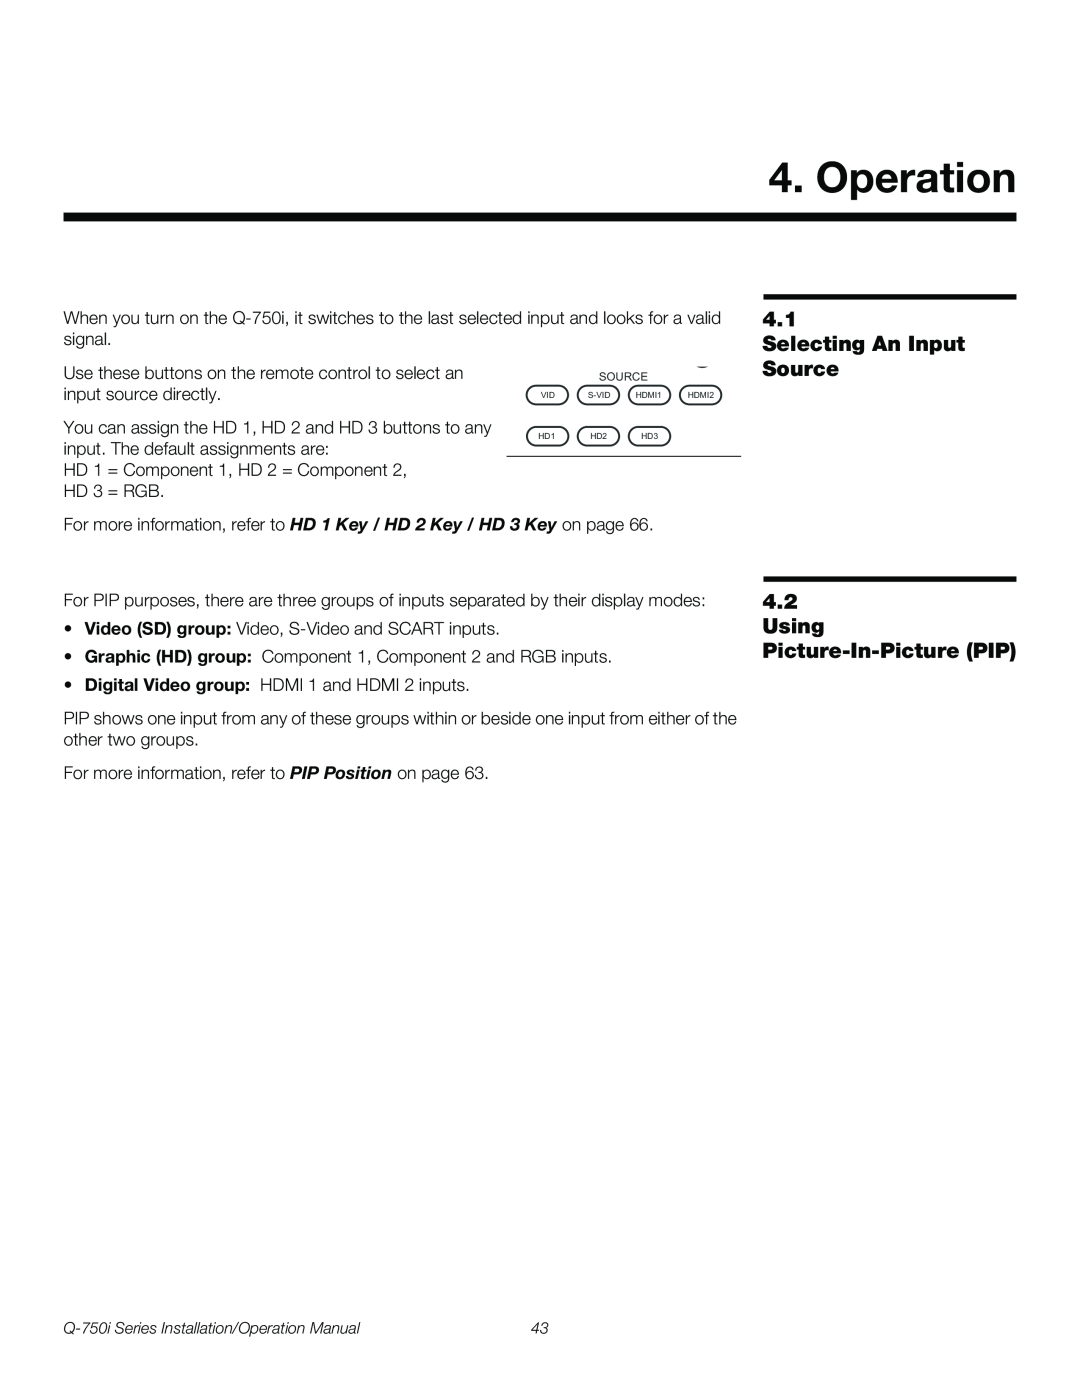 Runco Q-750I operation manual Operation, Selecting An Input, Source, Using Picture-In-PicturePIP 